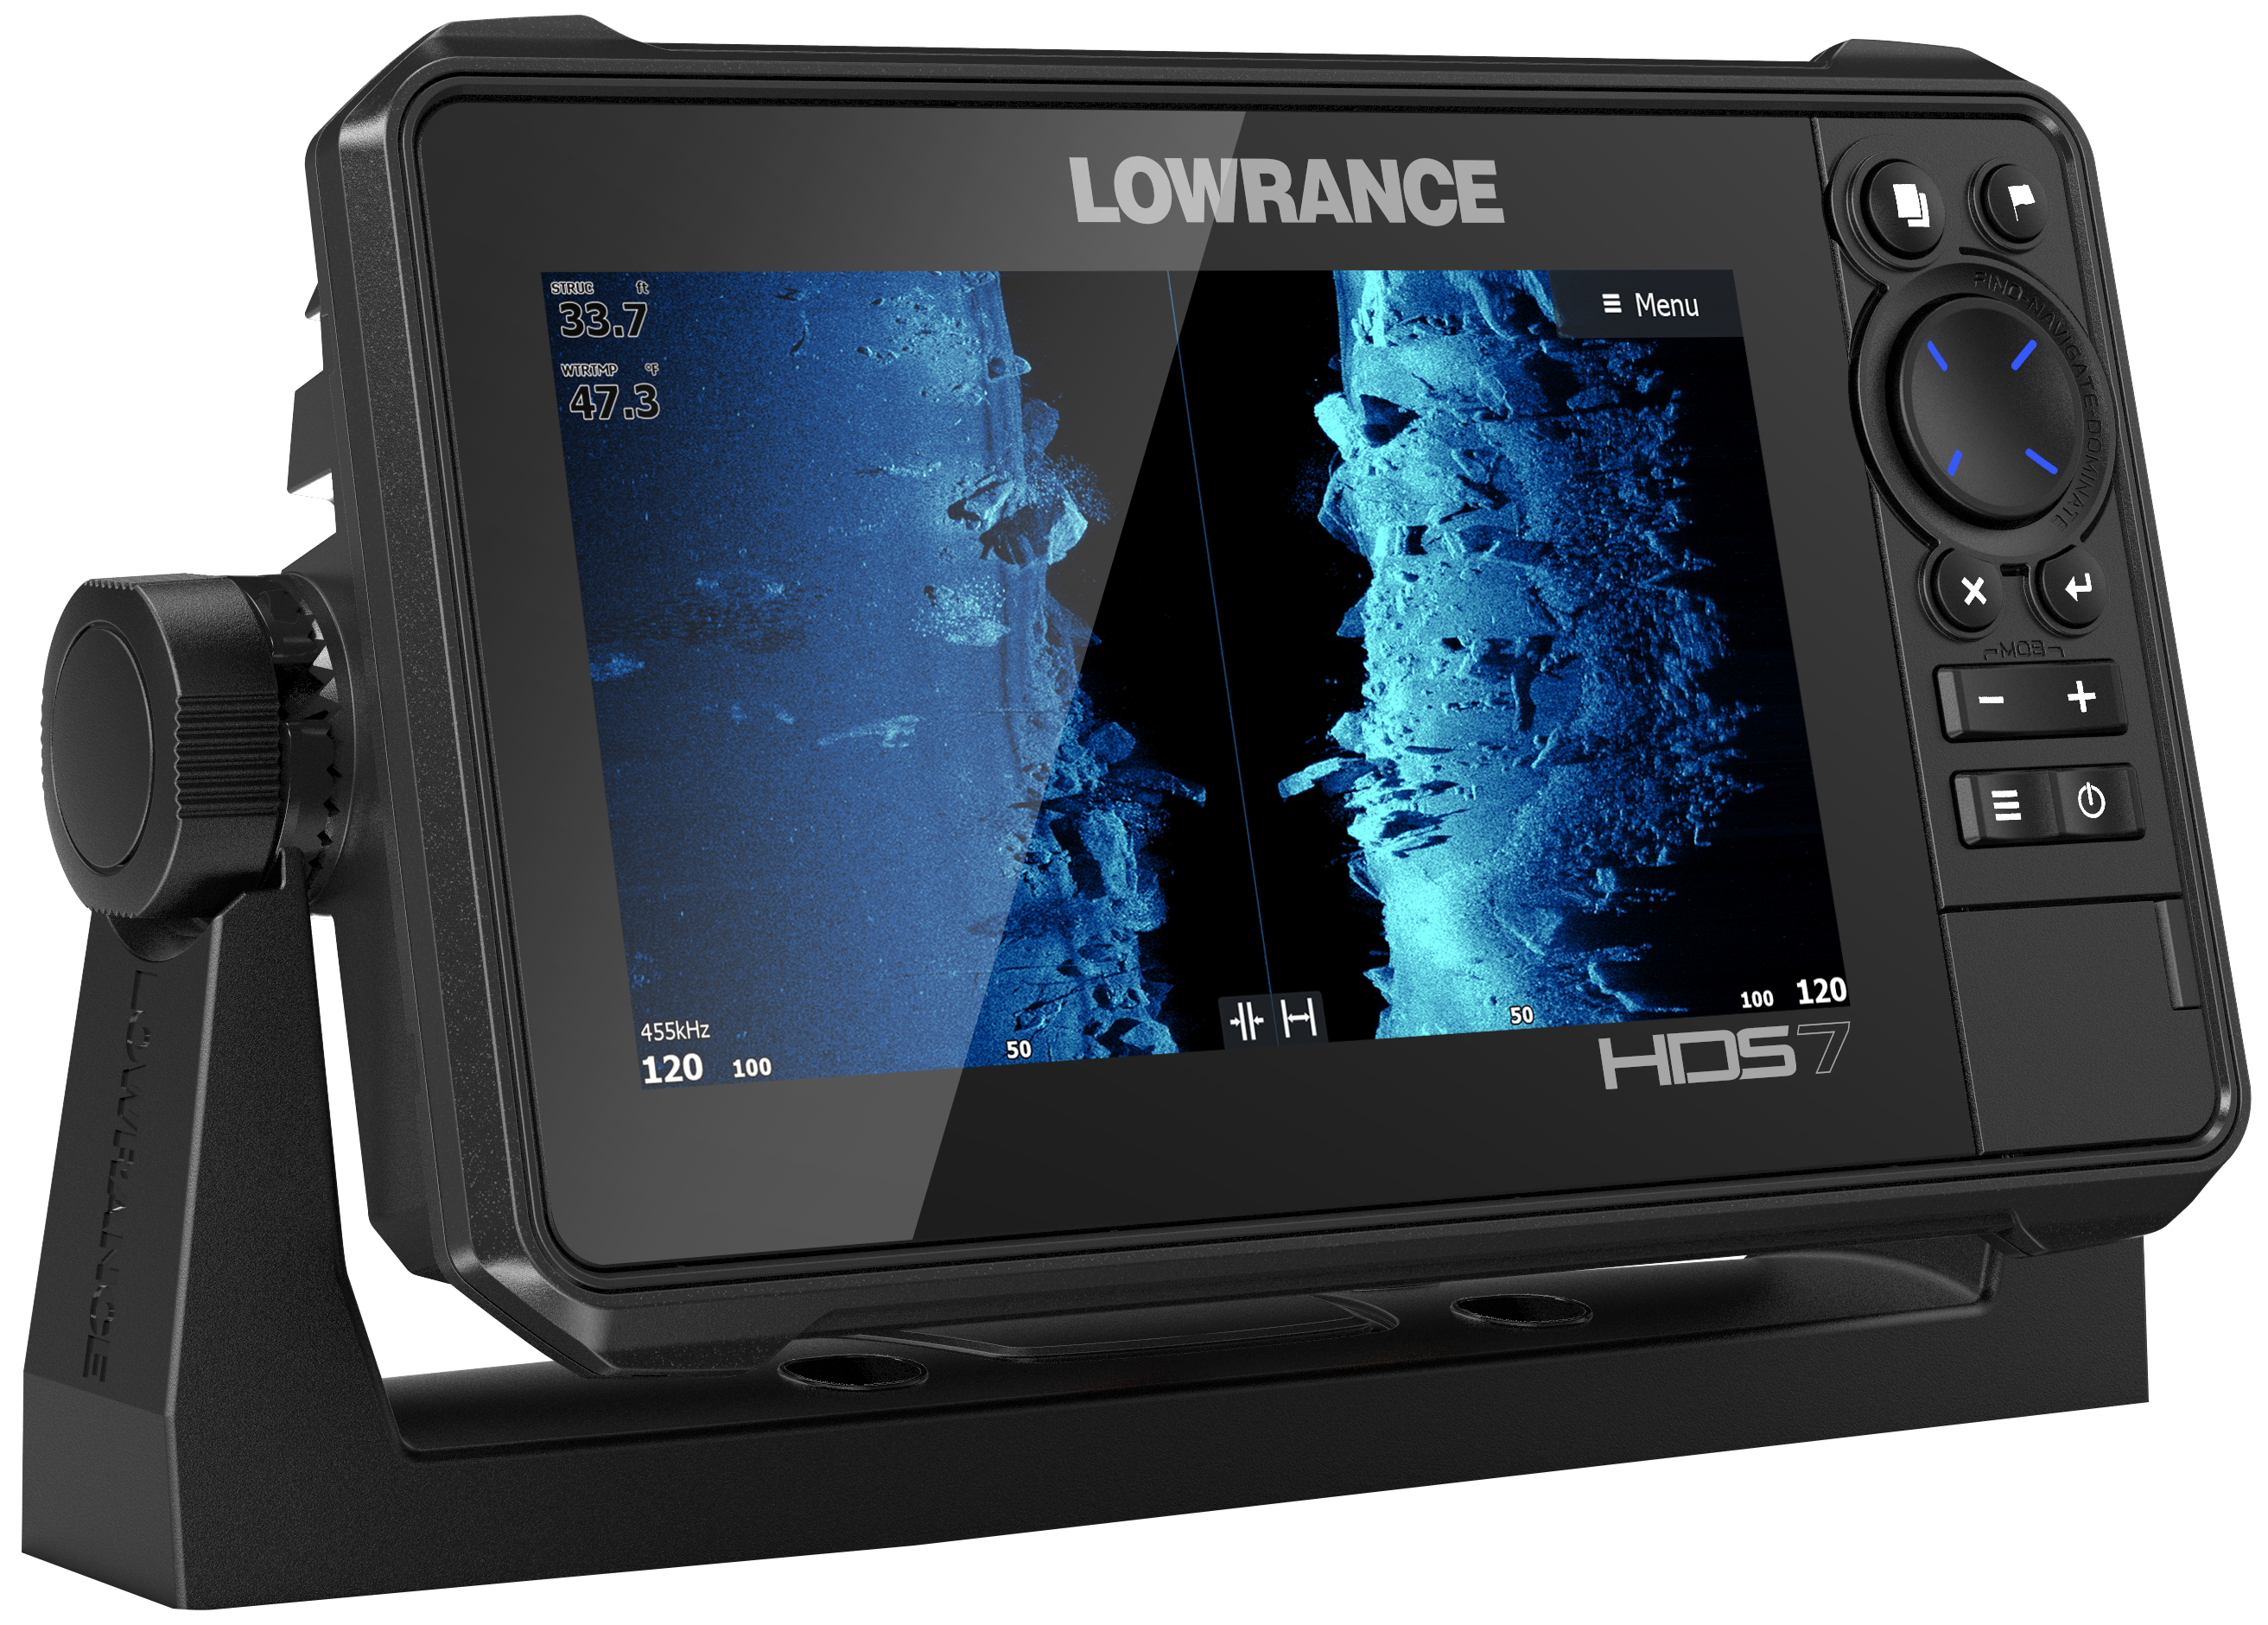 3-in-1 HDS-7 (ROW) Active LIVE Imaging NAVICO with Angeln